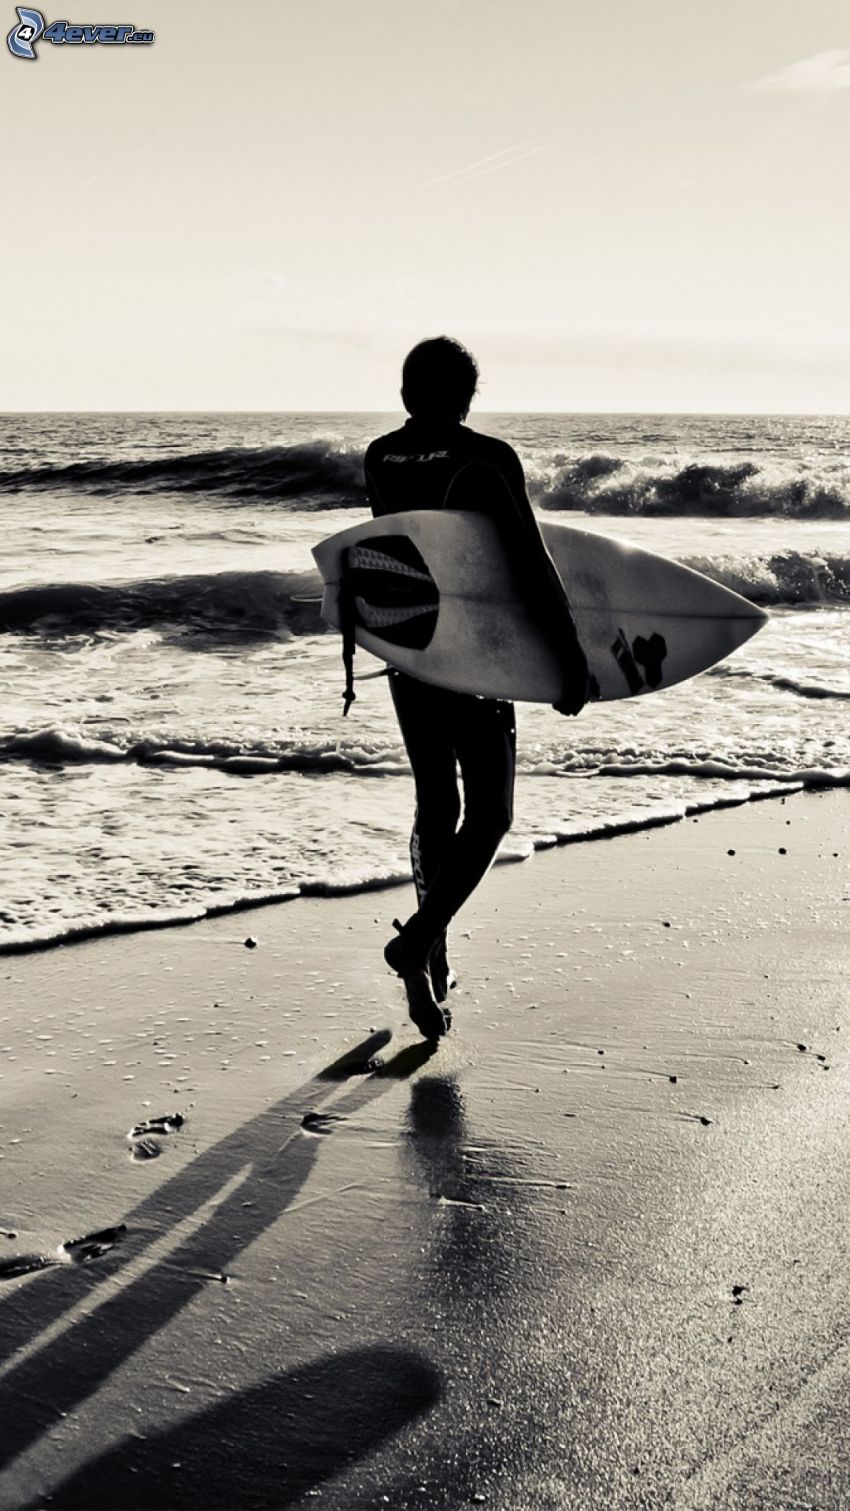 surfer, sandy beach, open sea, footprints in the sand, black and white photo